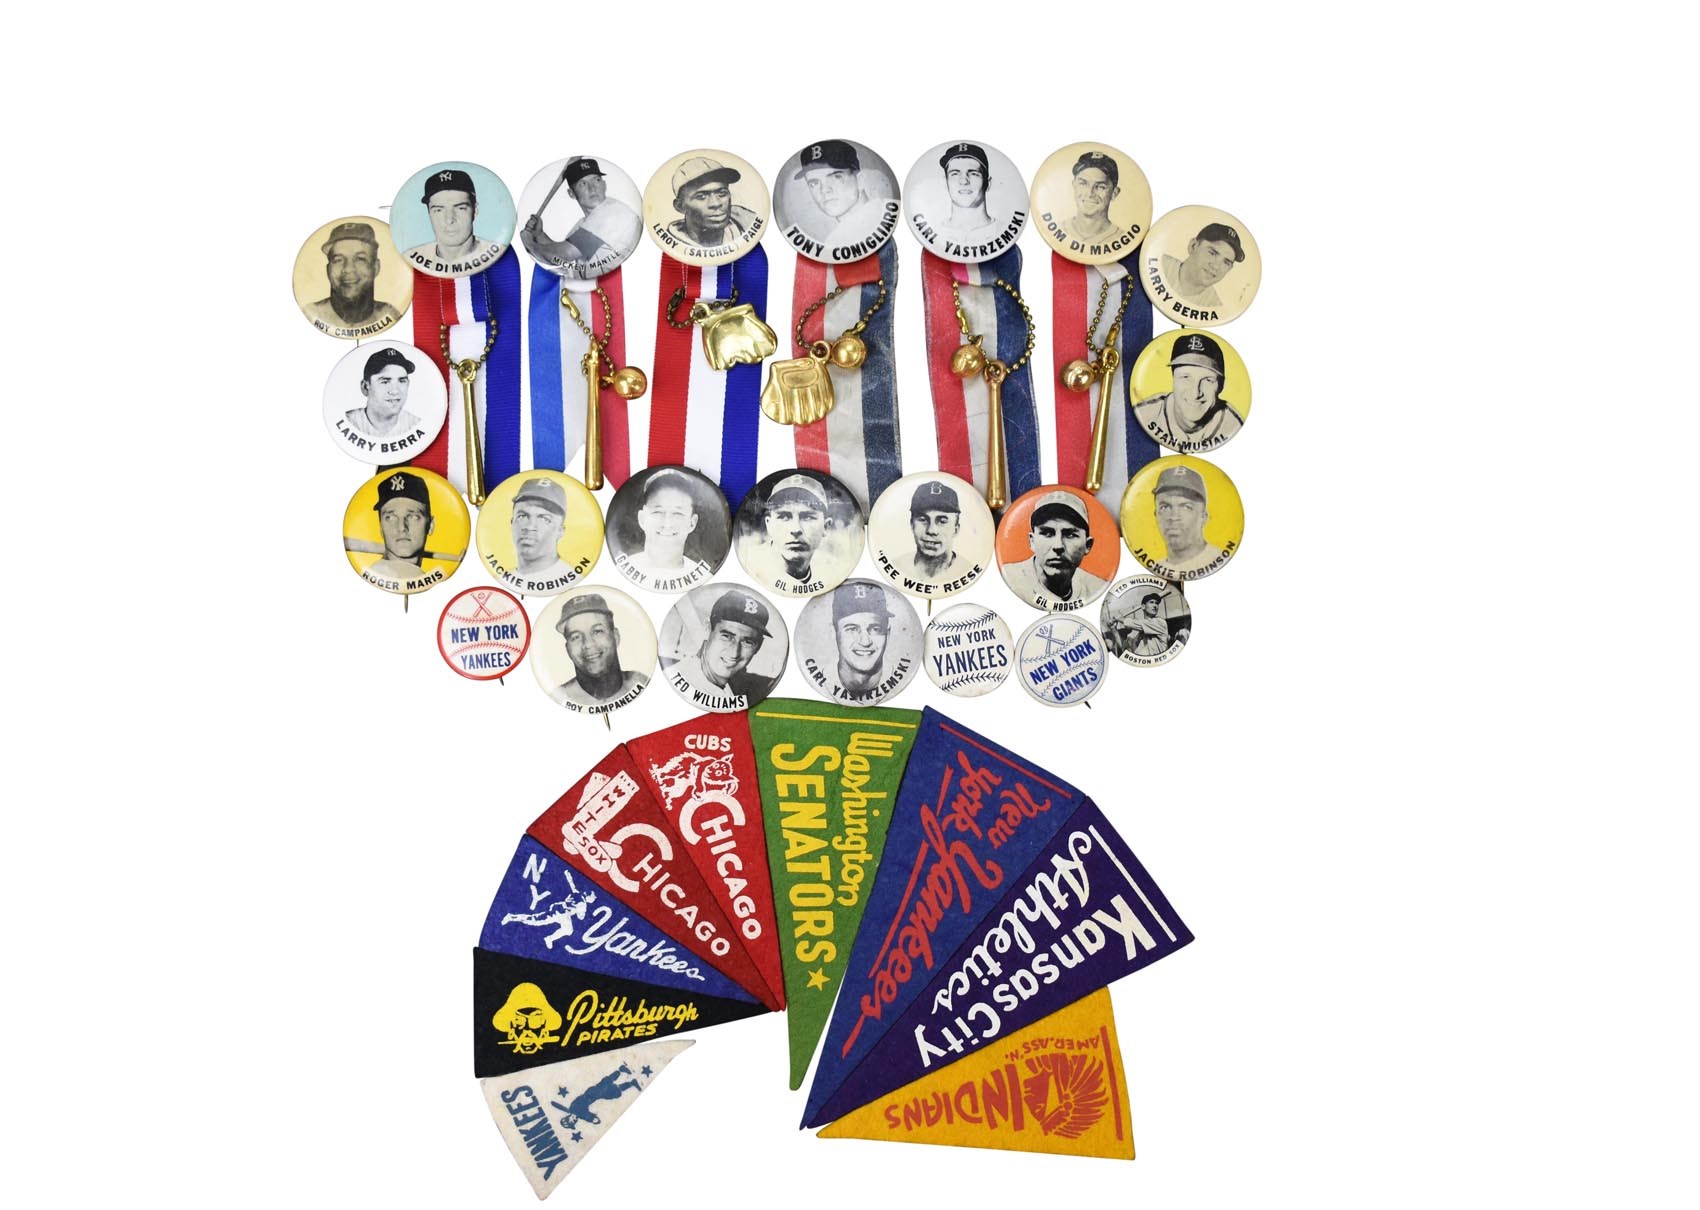 Tickets, Publications & Pins - 1950s Baseball PM10 Pin & Pennant Collection w/Major Hall of Famers (90+)